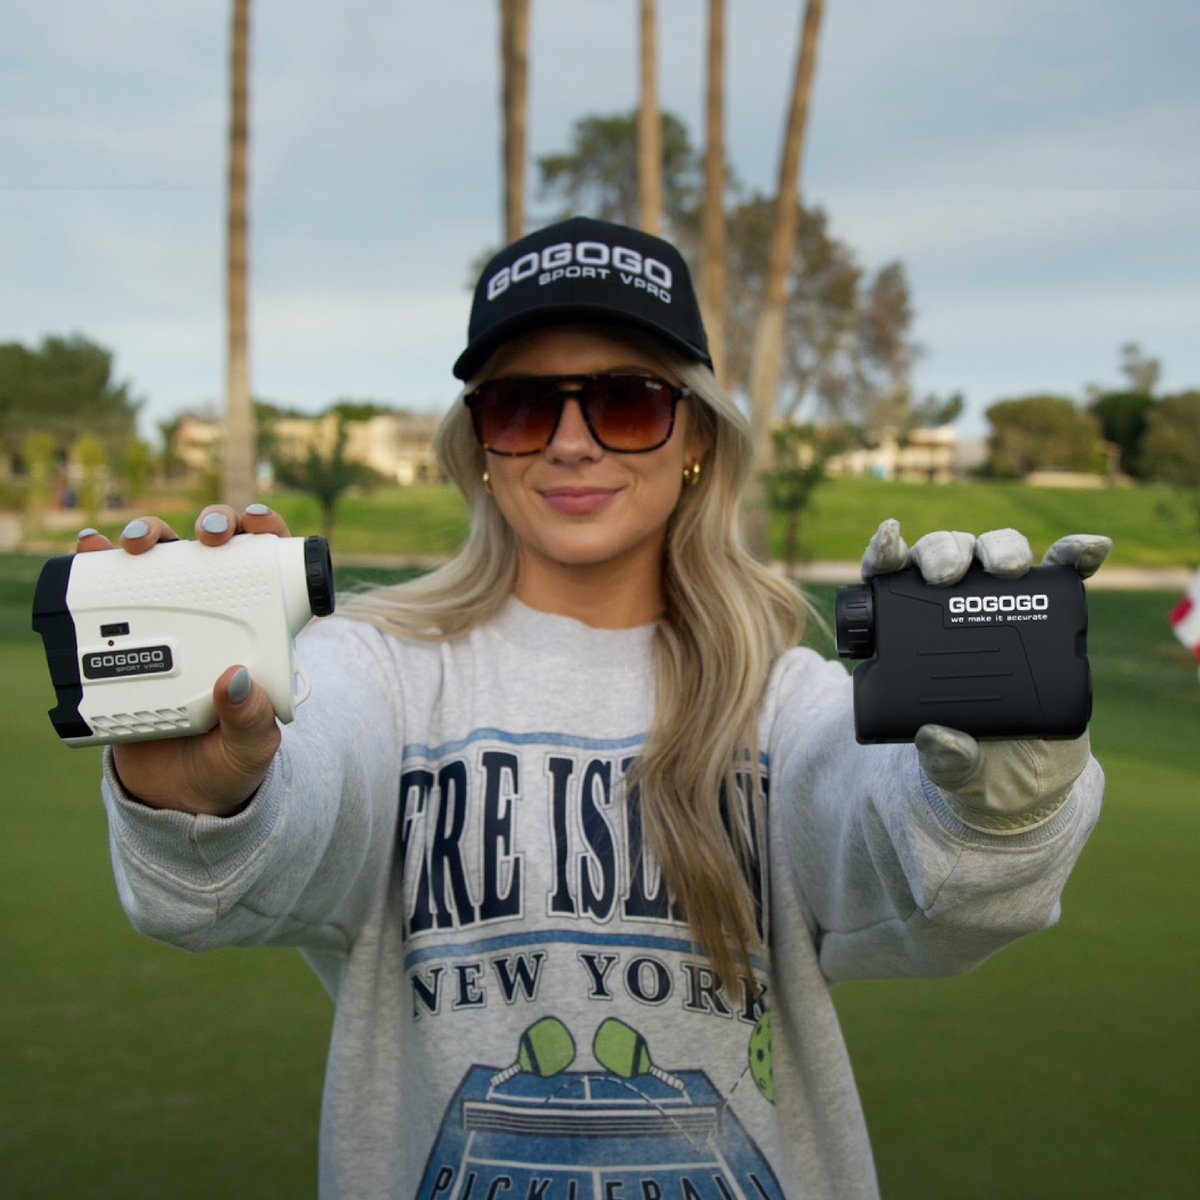 Knowing your distances inspires confidence, and golf is all about confidence.

#gogogosport #gogogosportvpro #golfday #golfswing #golfgirl #golfbabe #golfboy #golftwitter #giftideas